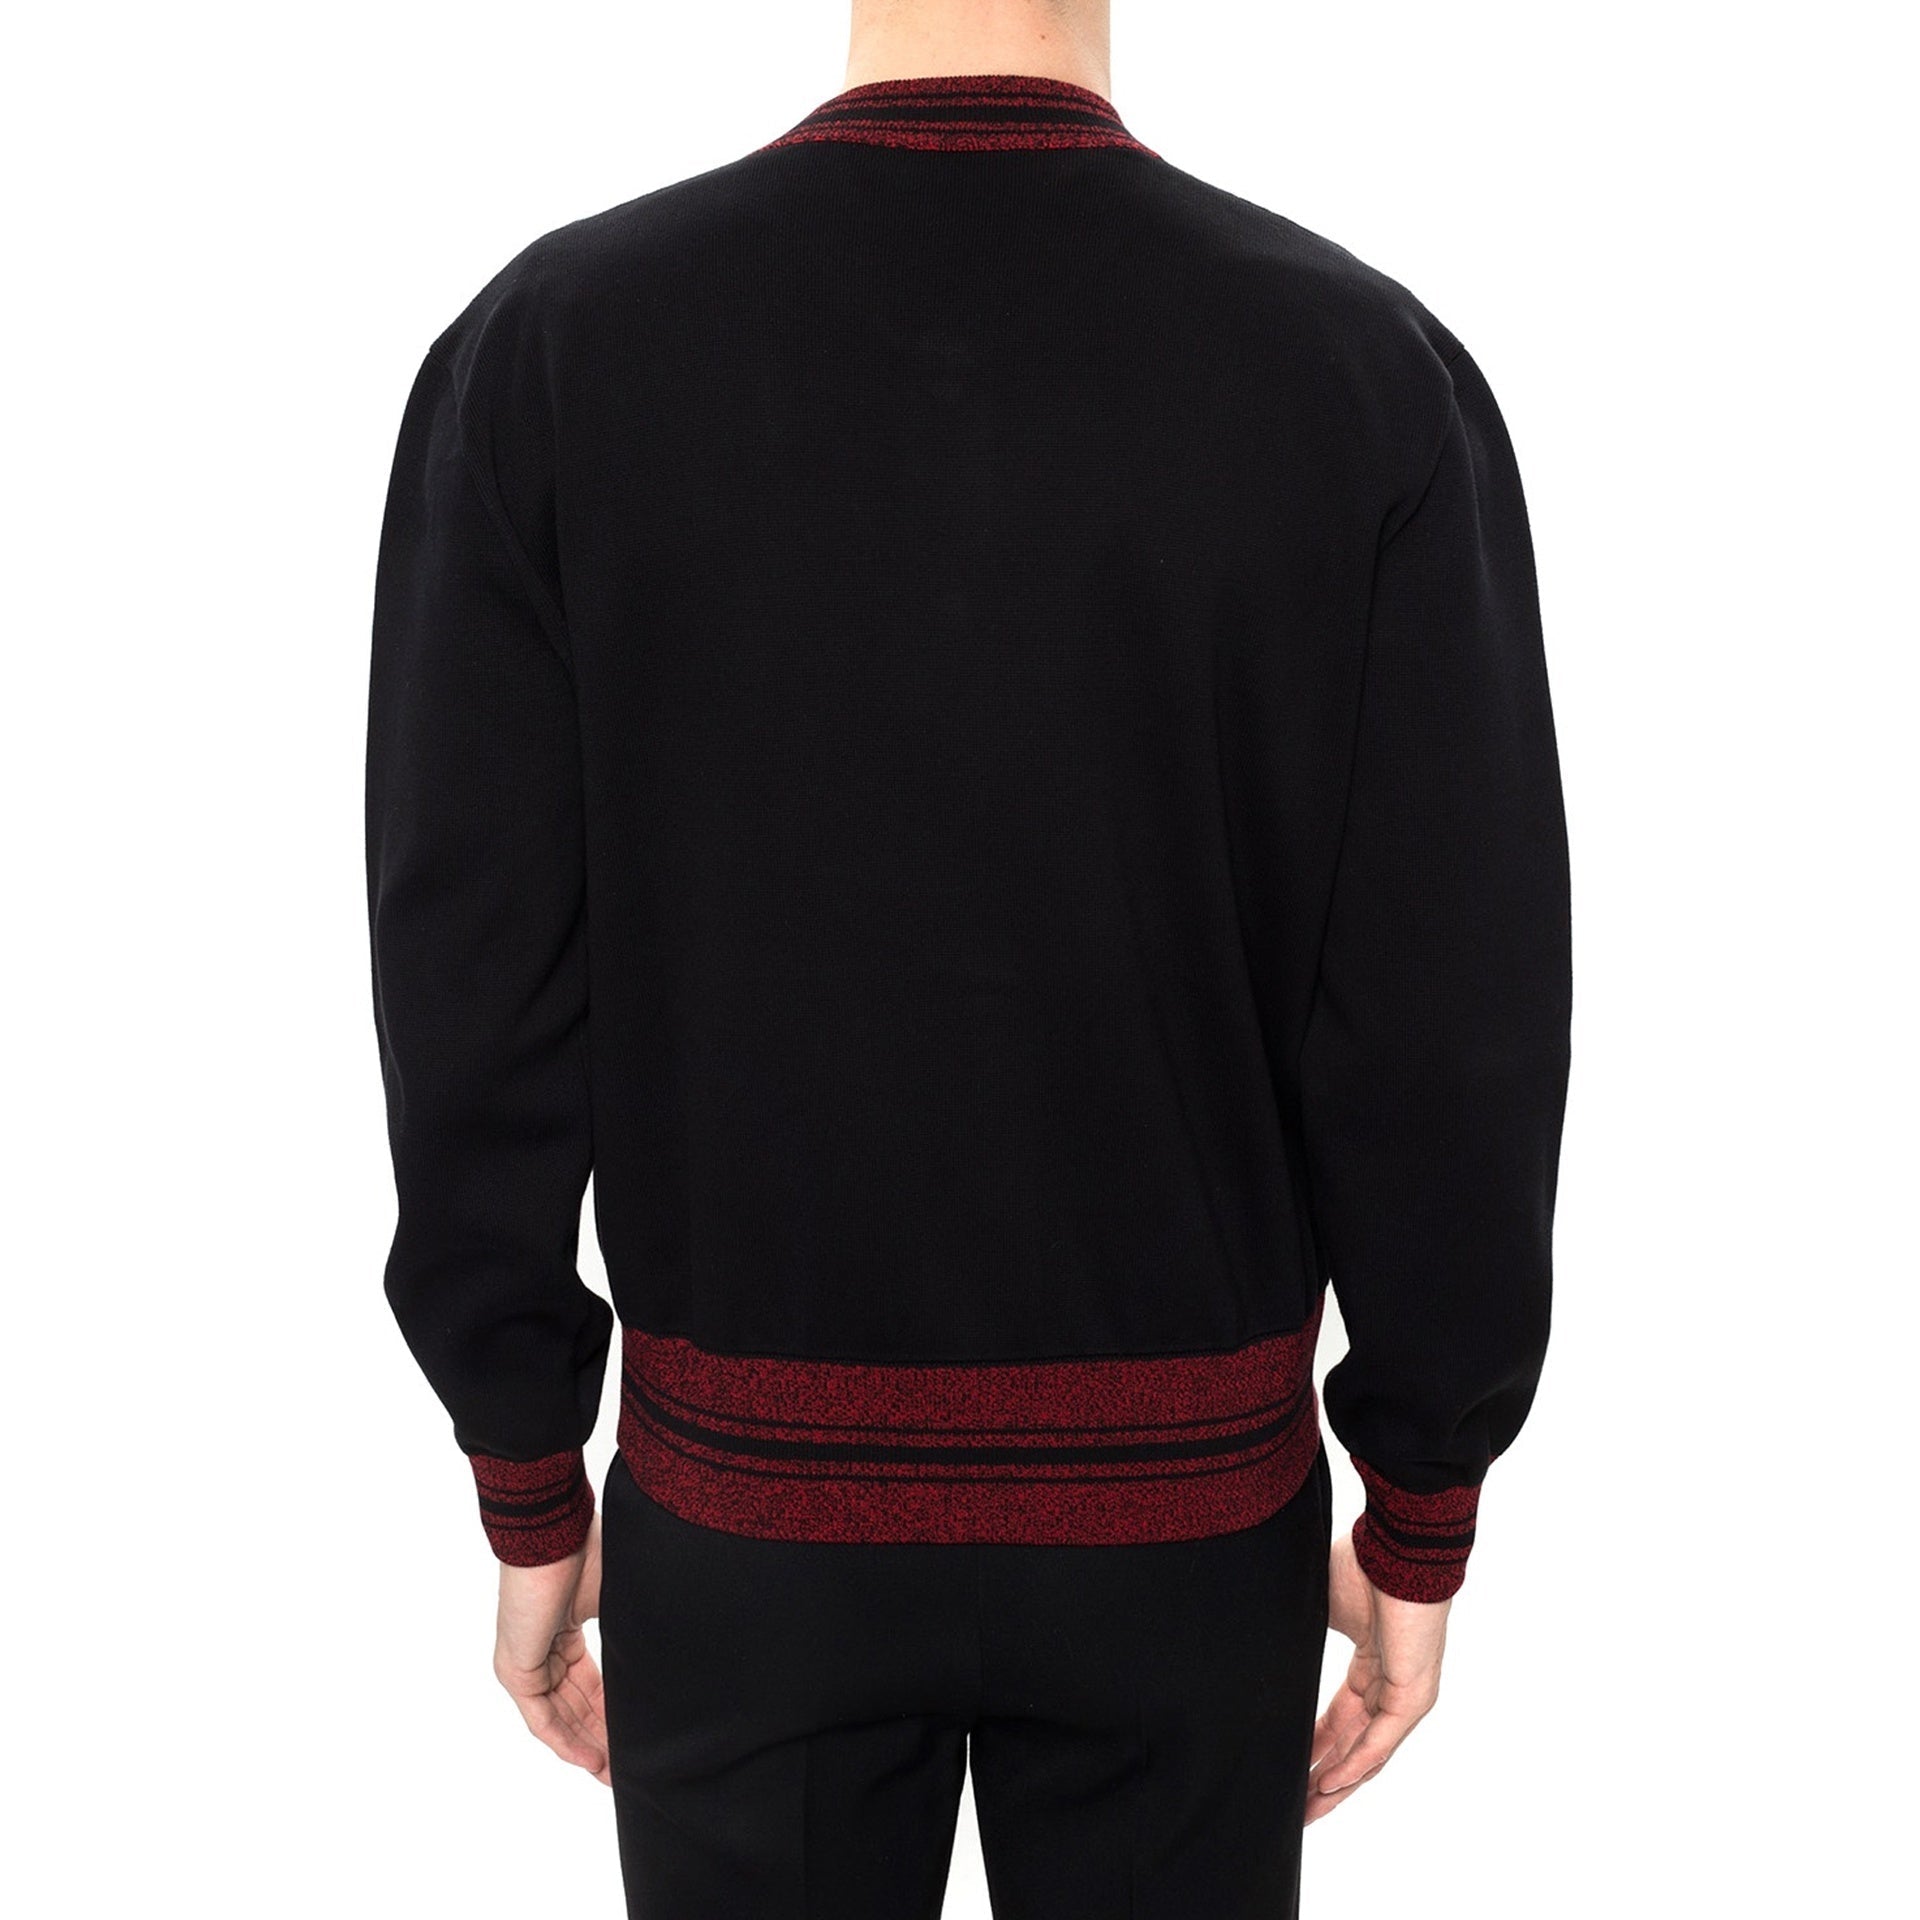 ALEXANDER-MCQUEEN-OUTLET-SALE-Alexander-McQueen-Knitted-Cardigan-Strick-ARCHIVE-COLLECTION-3.jpg